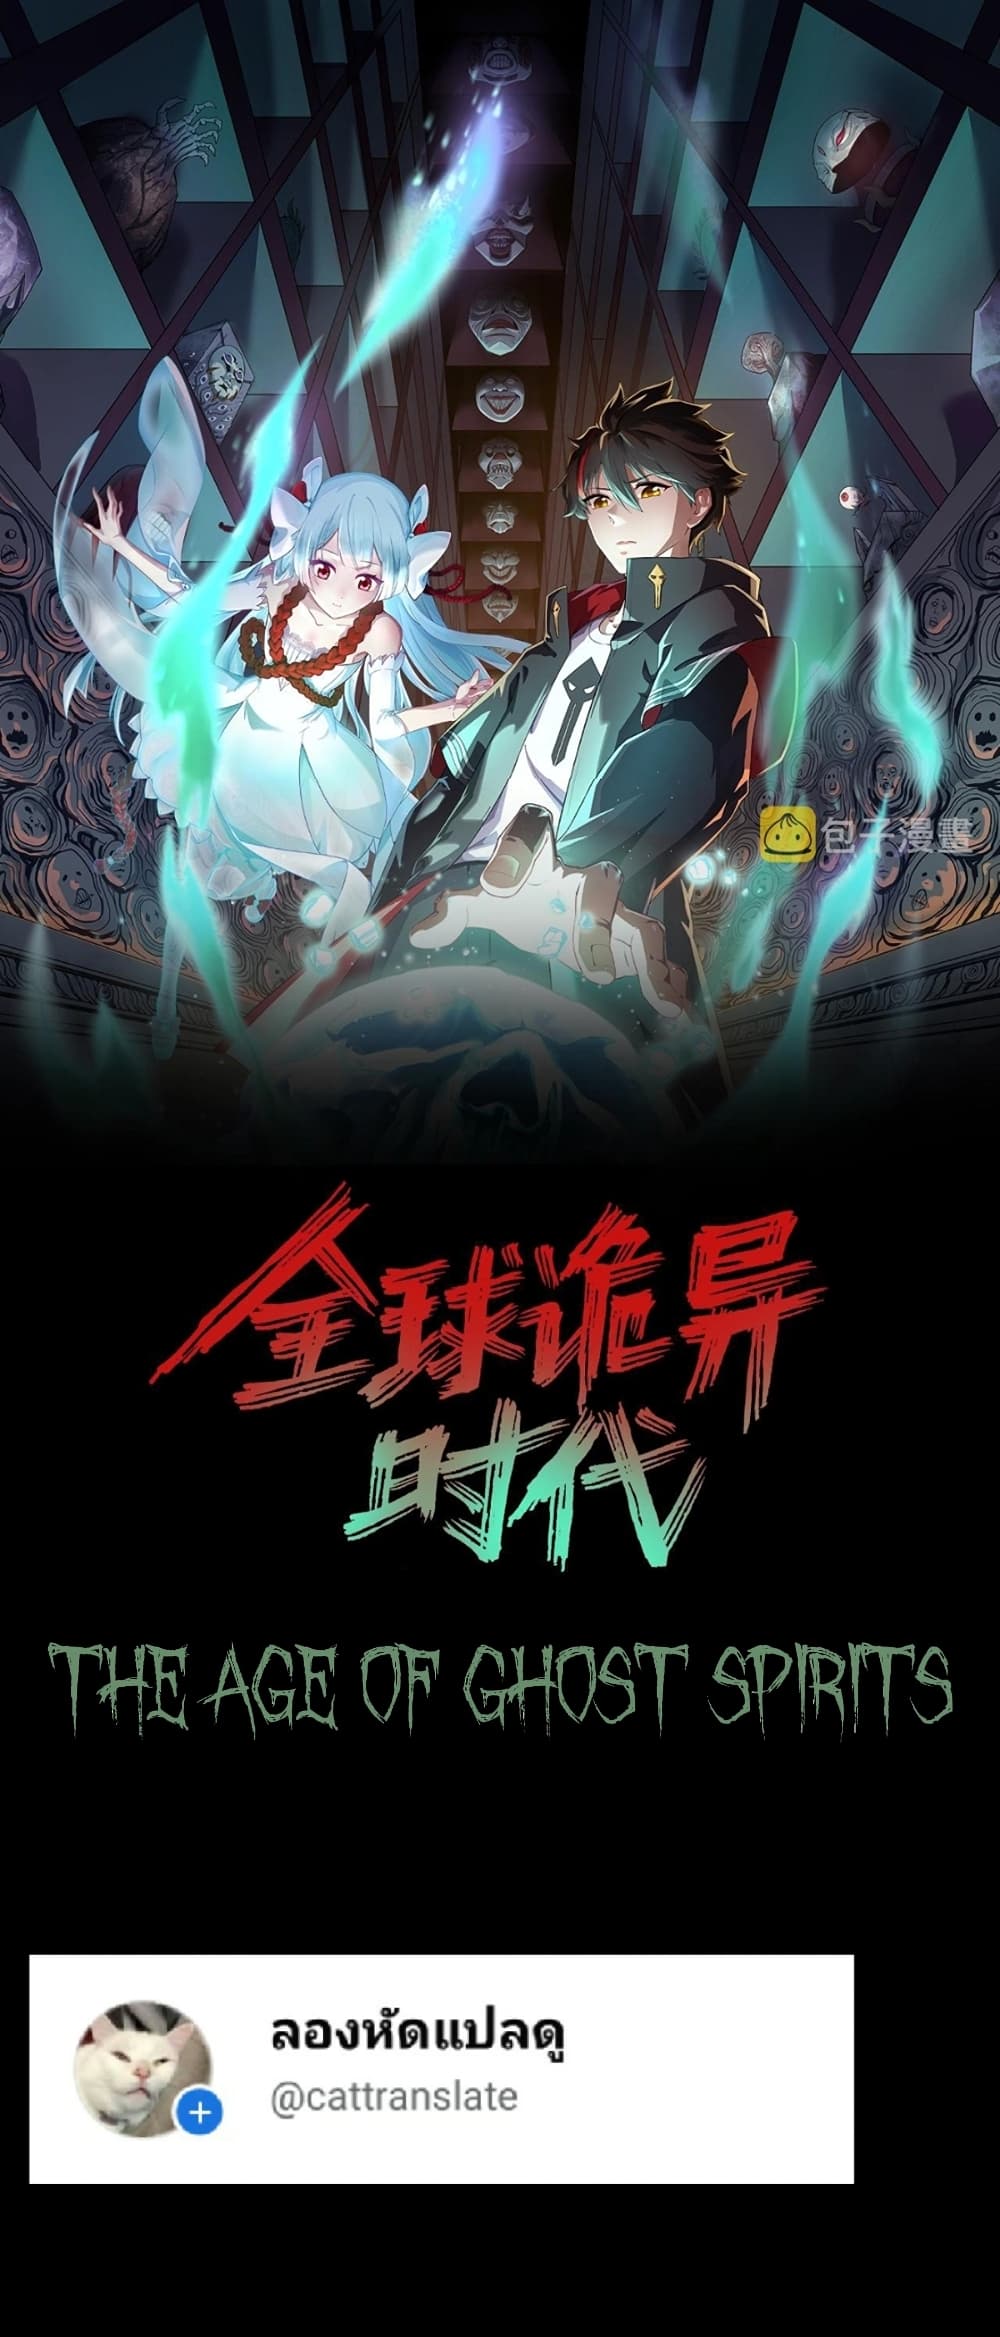 The Age of Ghost Spirits à¸à¸­à¸à¸à¸µà¹ 10 (1)